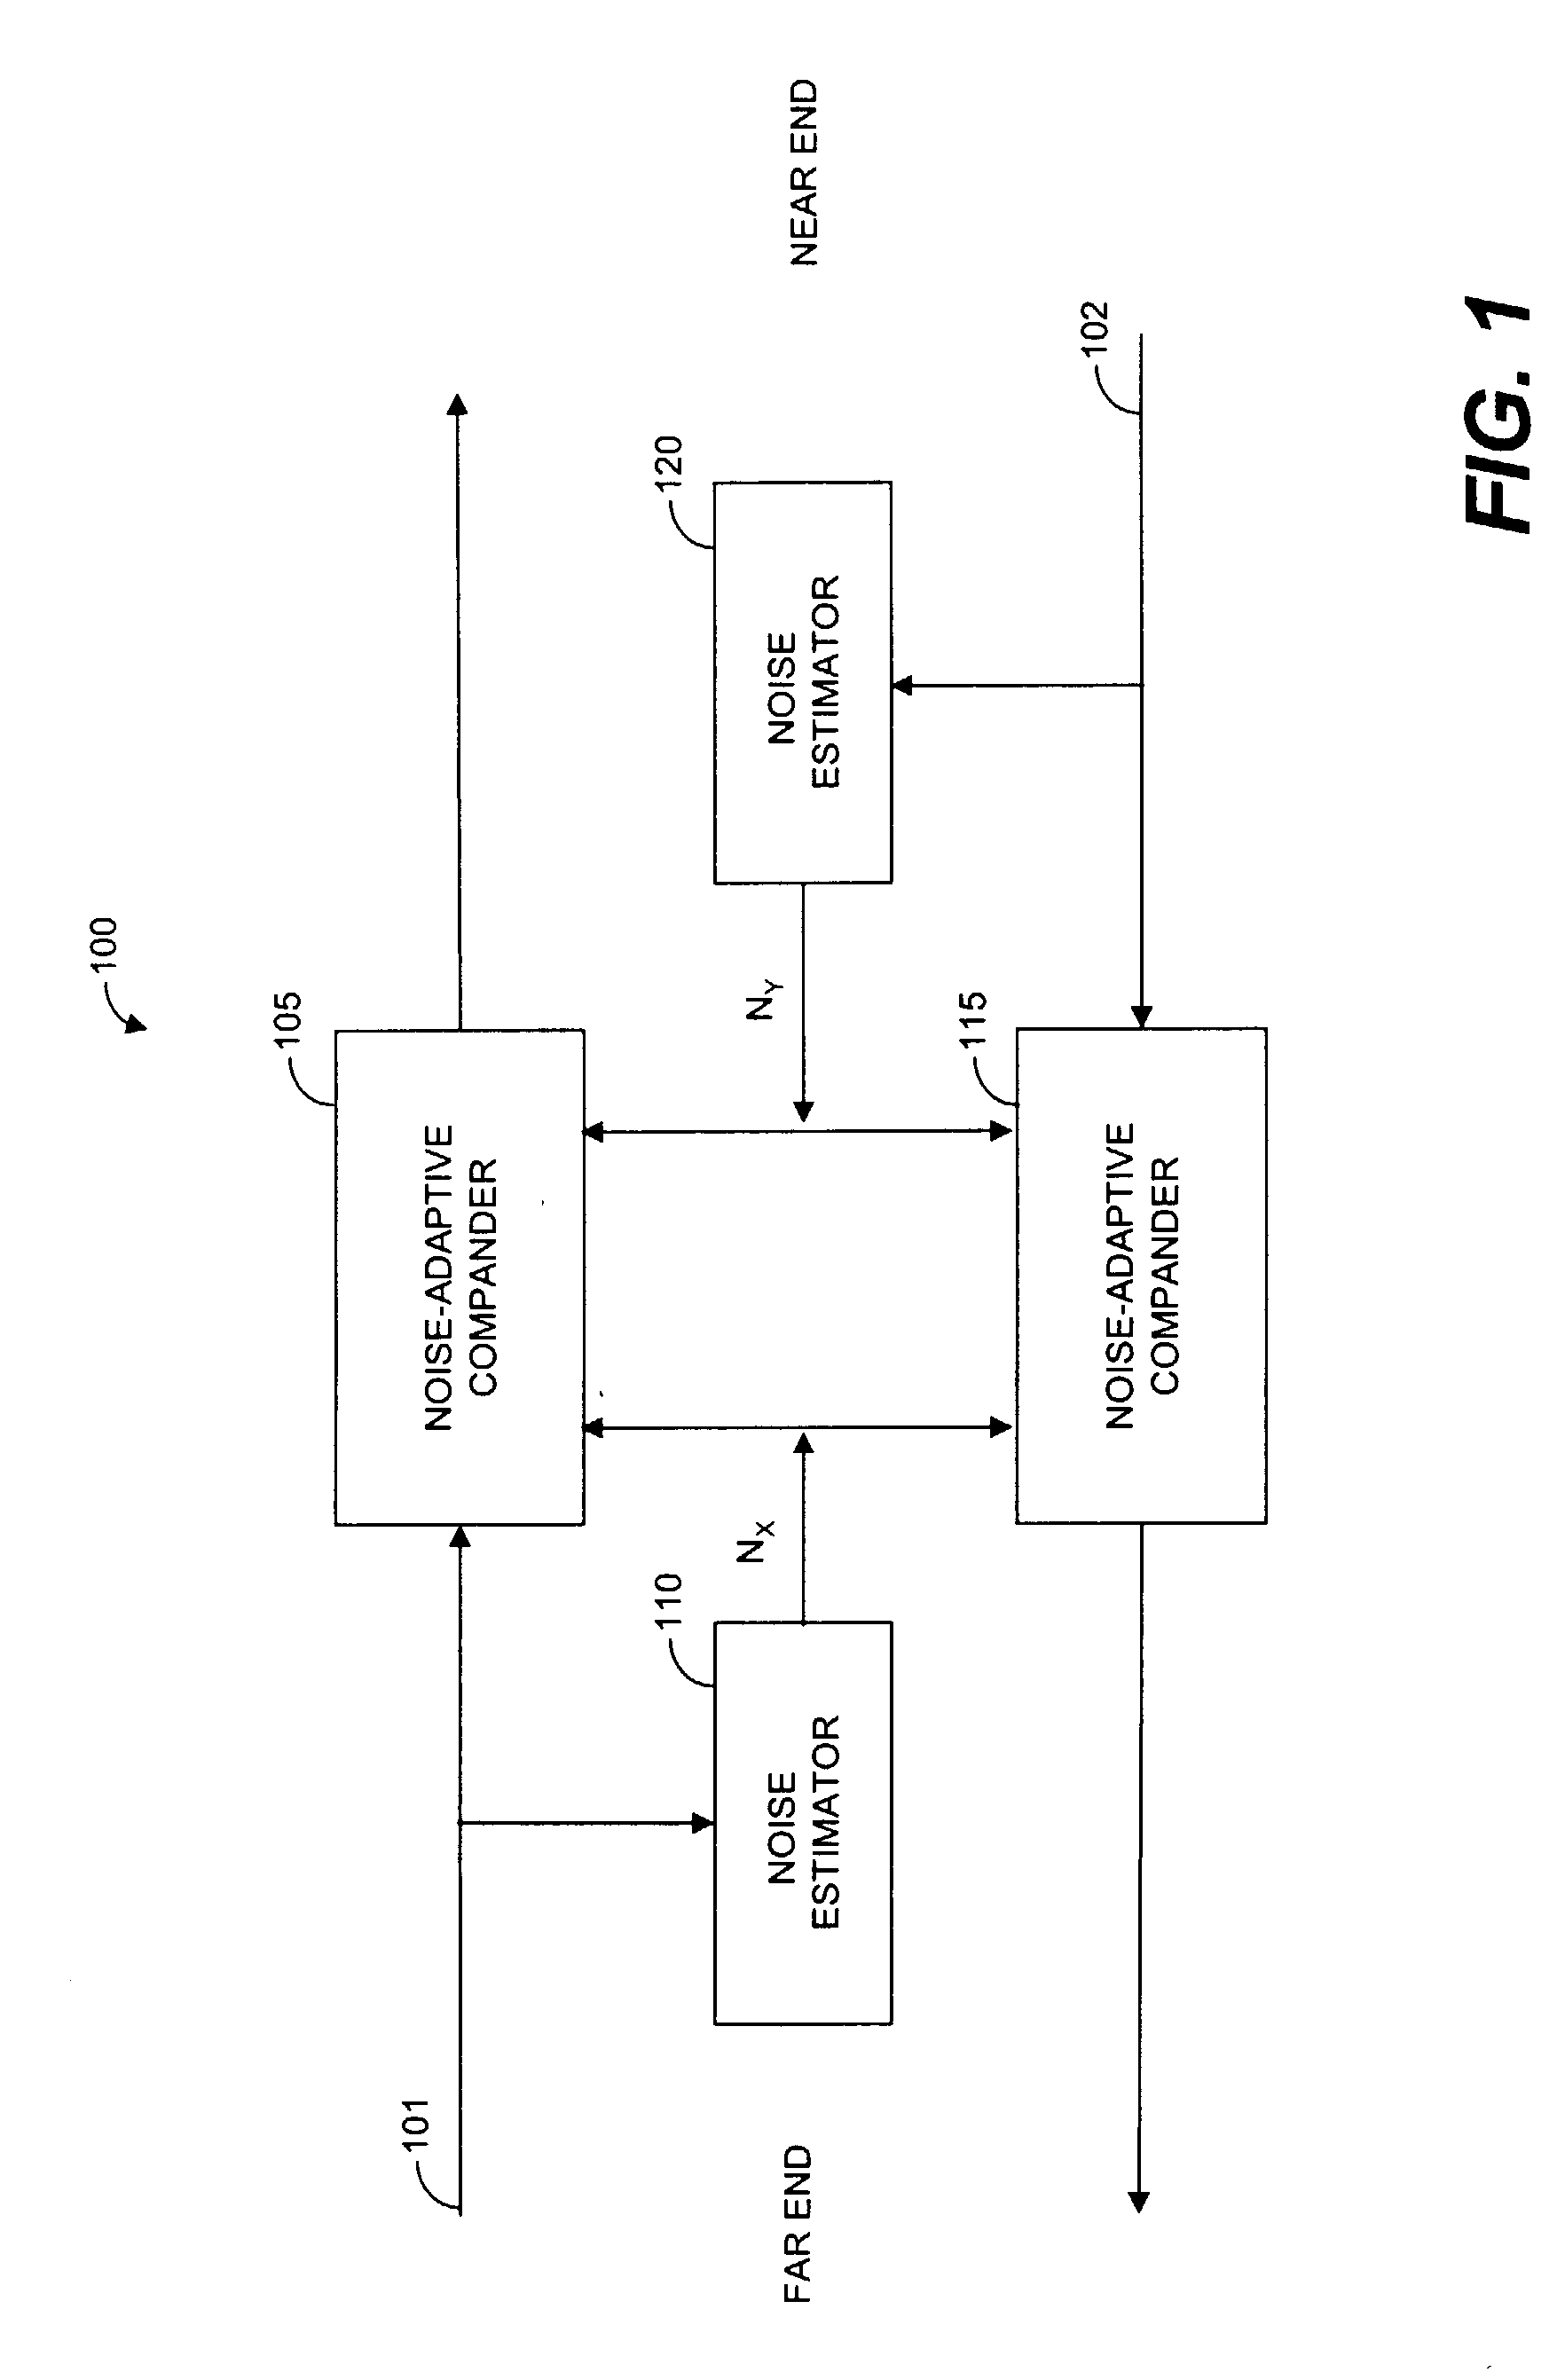 Systems and methods for far-end noise reduction and near-end noise compensation in a mixed time-frequency domain compander to improve signal quality in communications systems